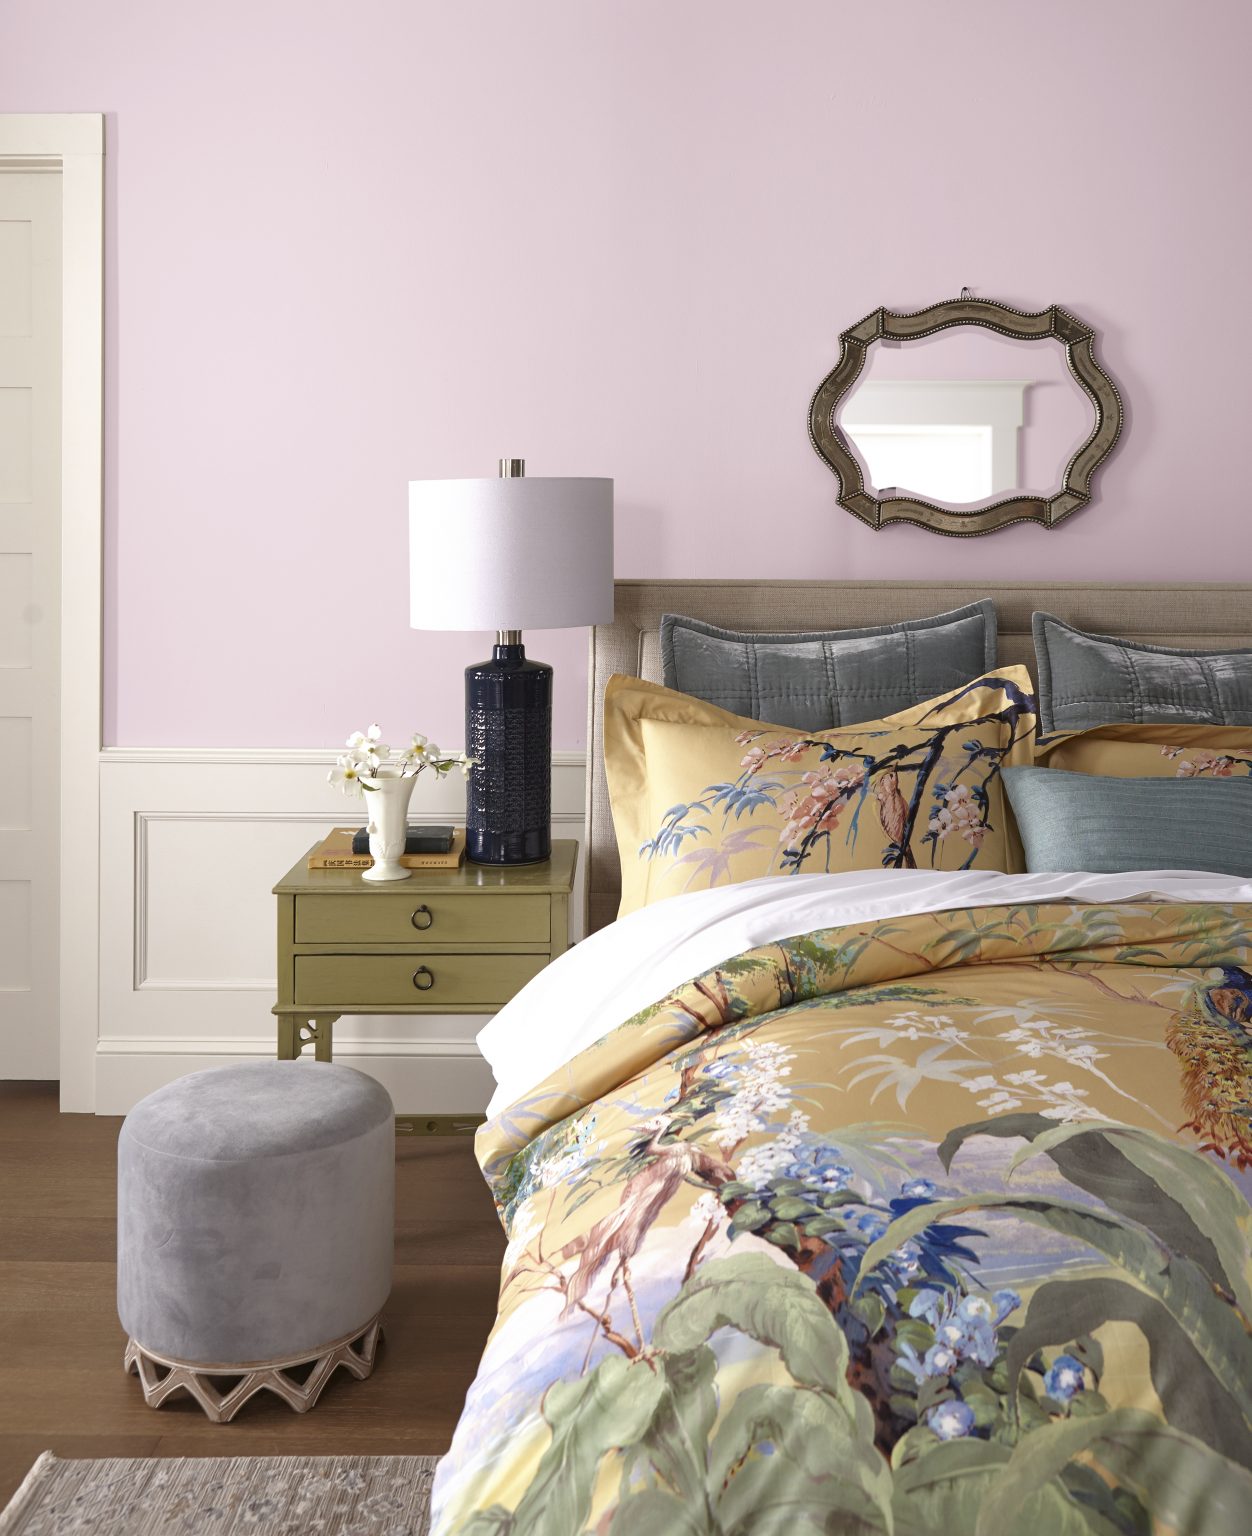 A bedroom with walls painted in a pink-lavender colour and cream trim and board and batten